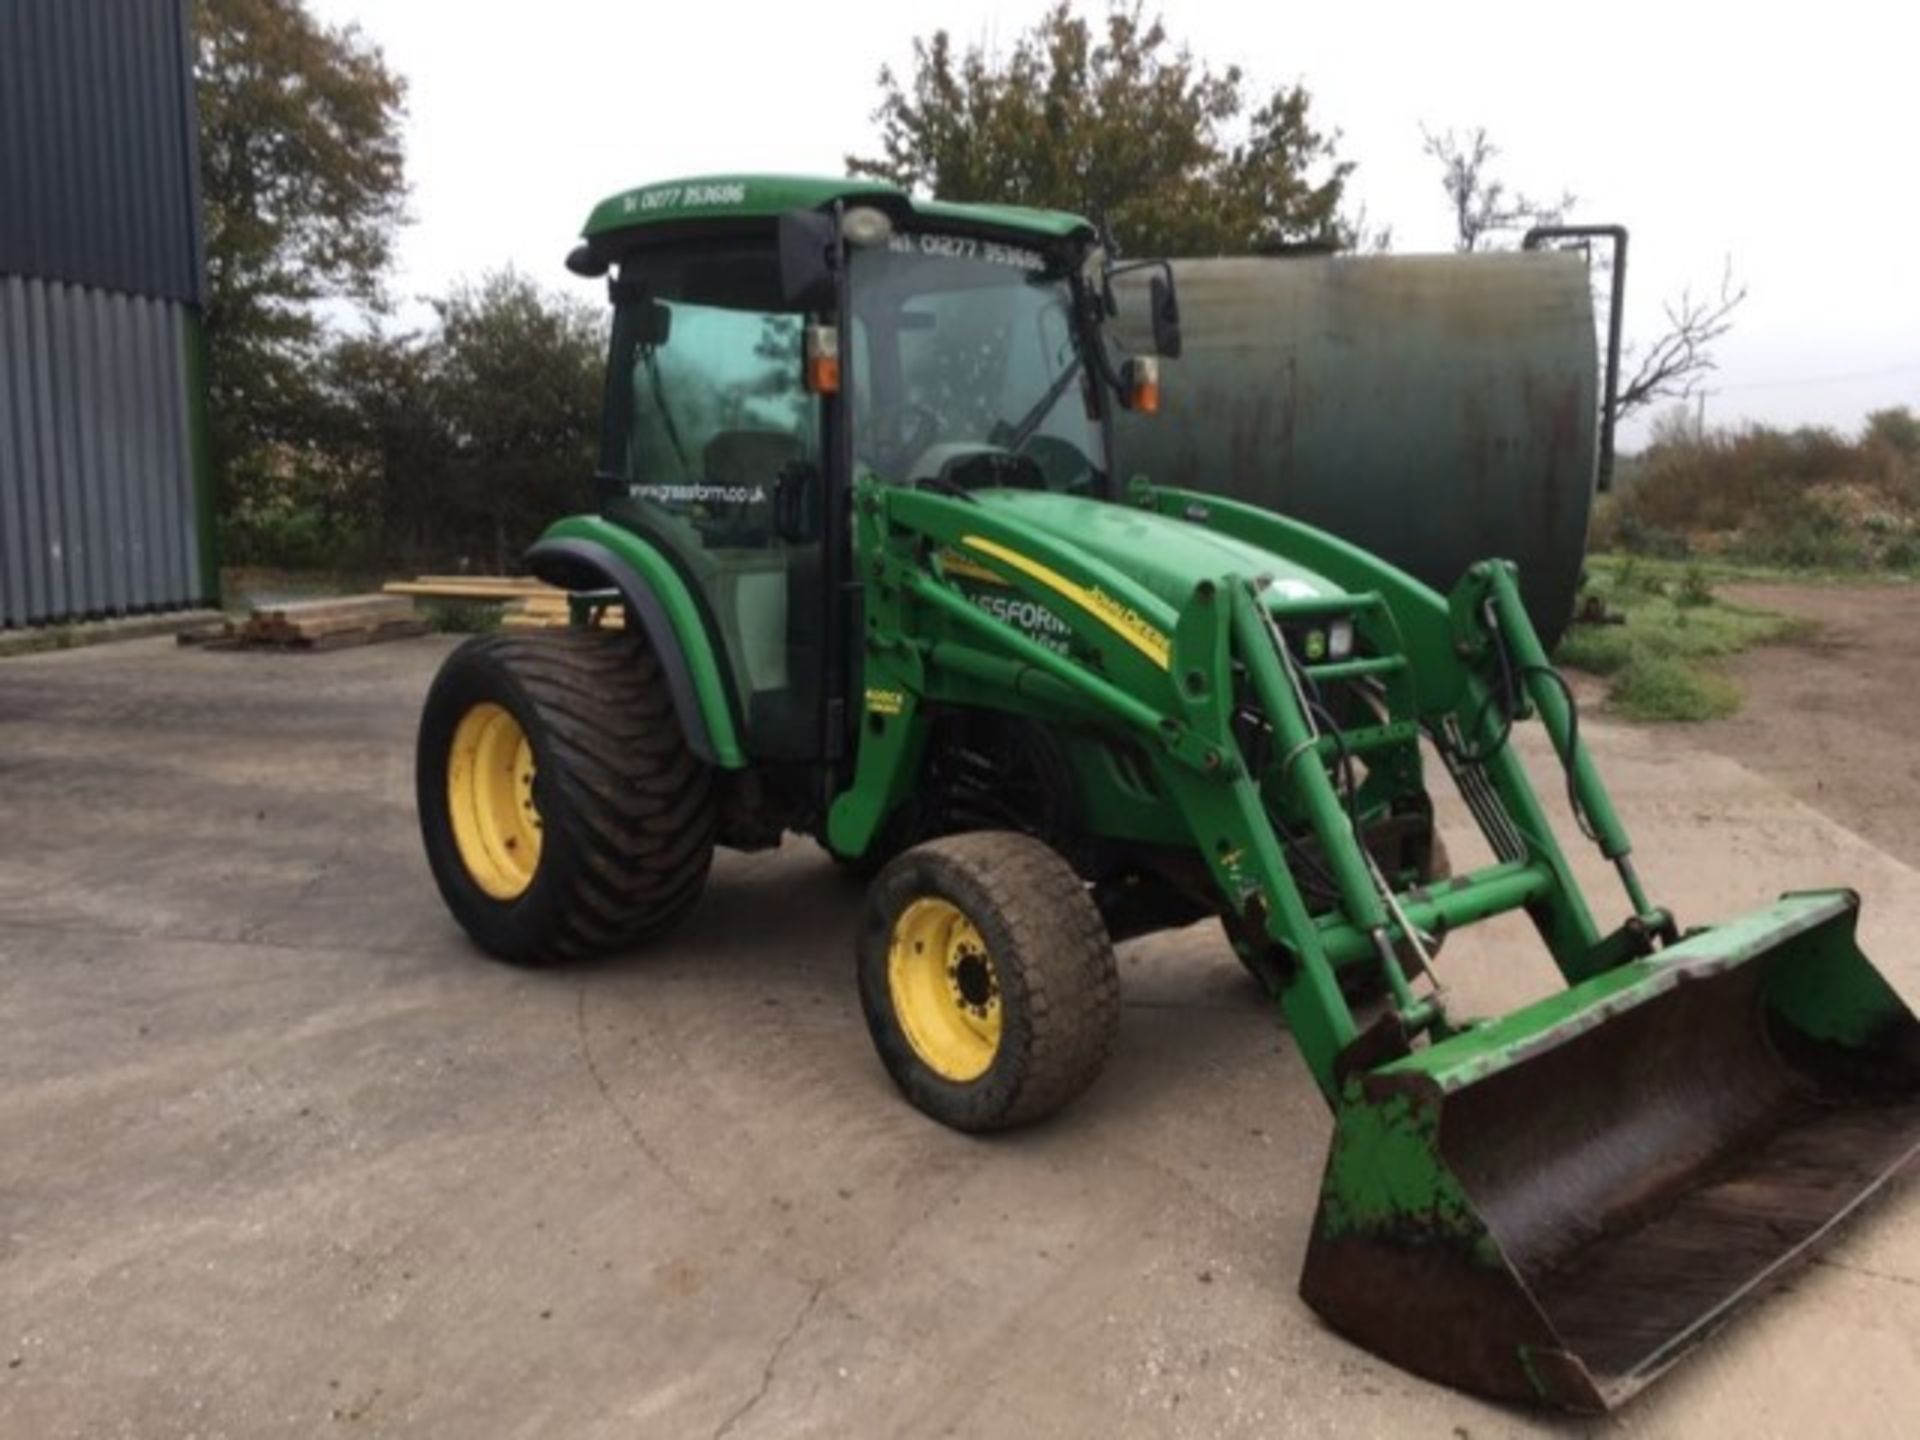 John Deere 4720 compact tractor fitted with grassland tyres, 66 HP, with 400CX front loader, - Image 6 of 8